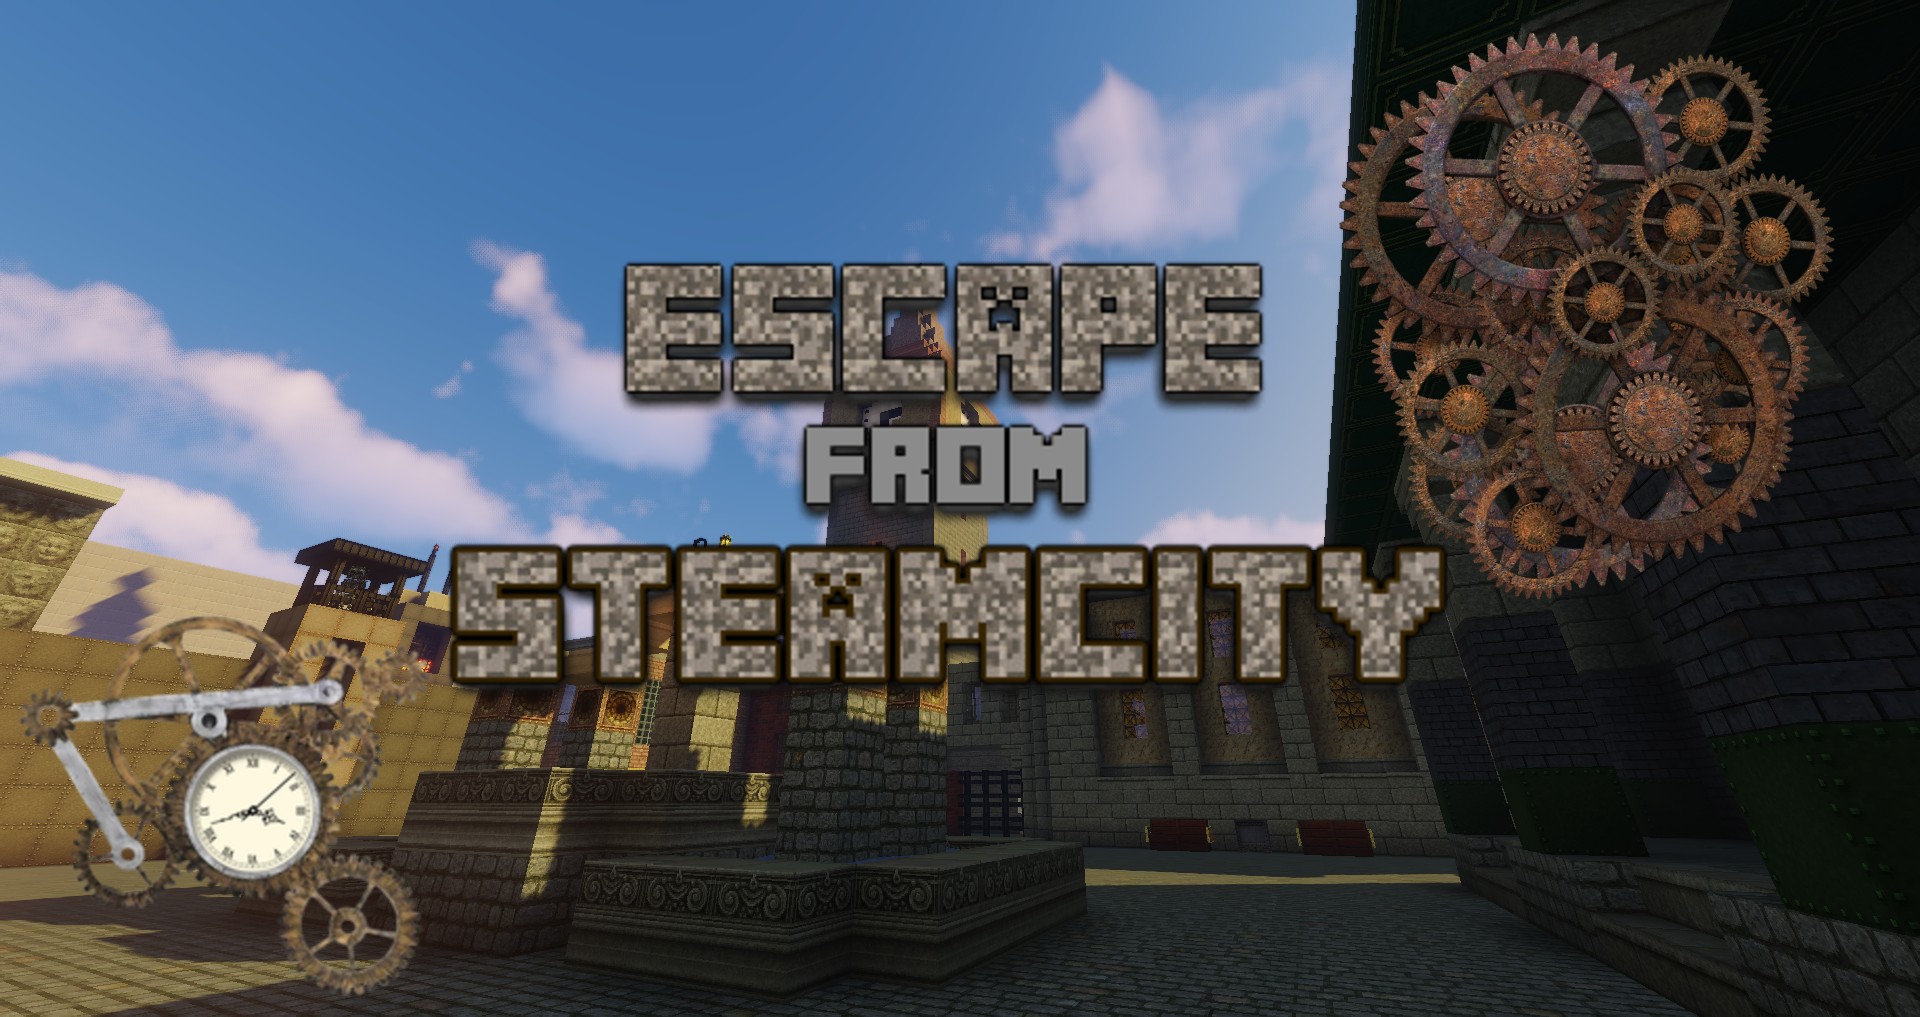 Tải về Escape from Steamcity cho Minecraft 1.12.2